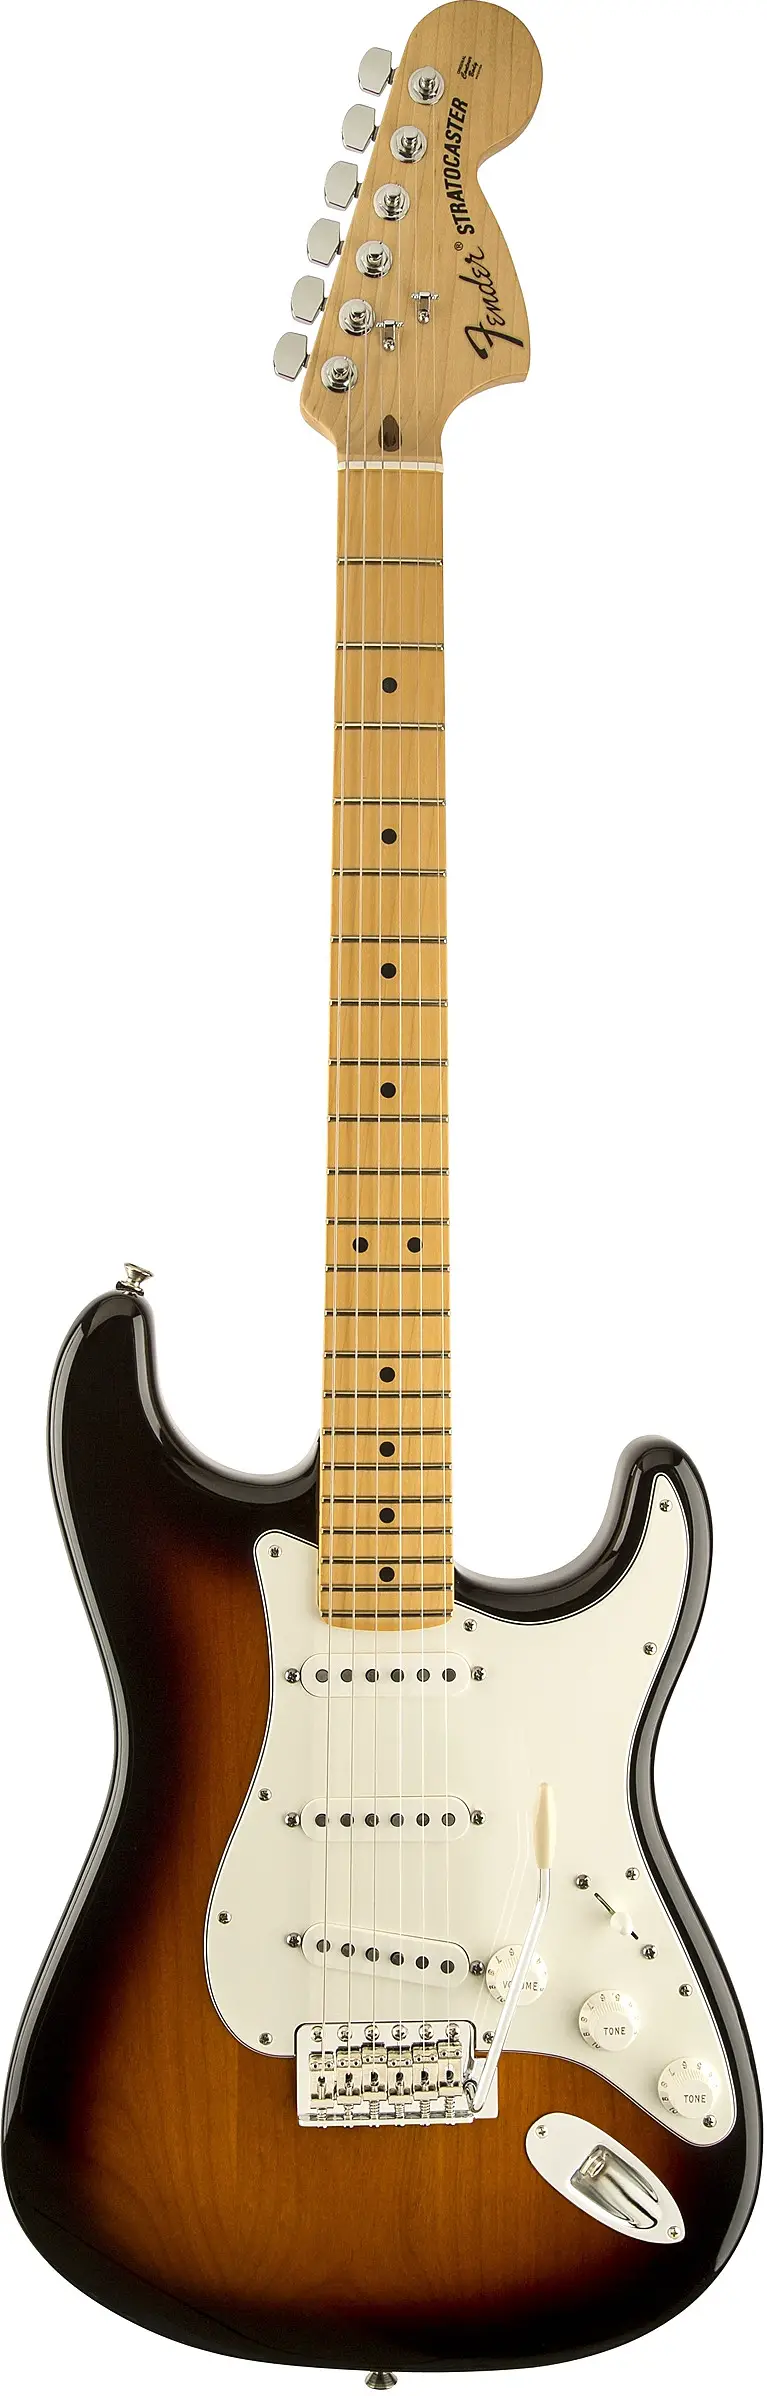 American Special Stratocaster (2018) by Fender